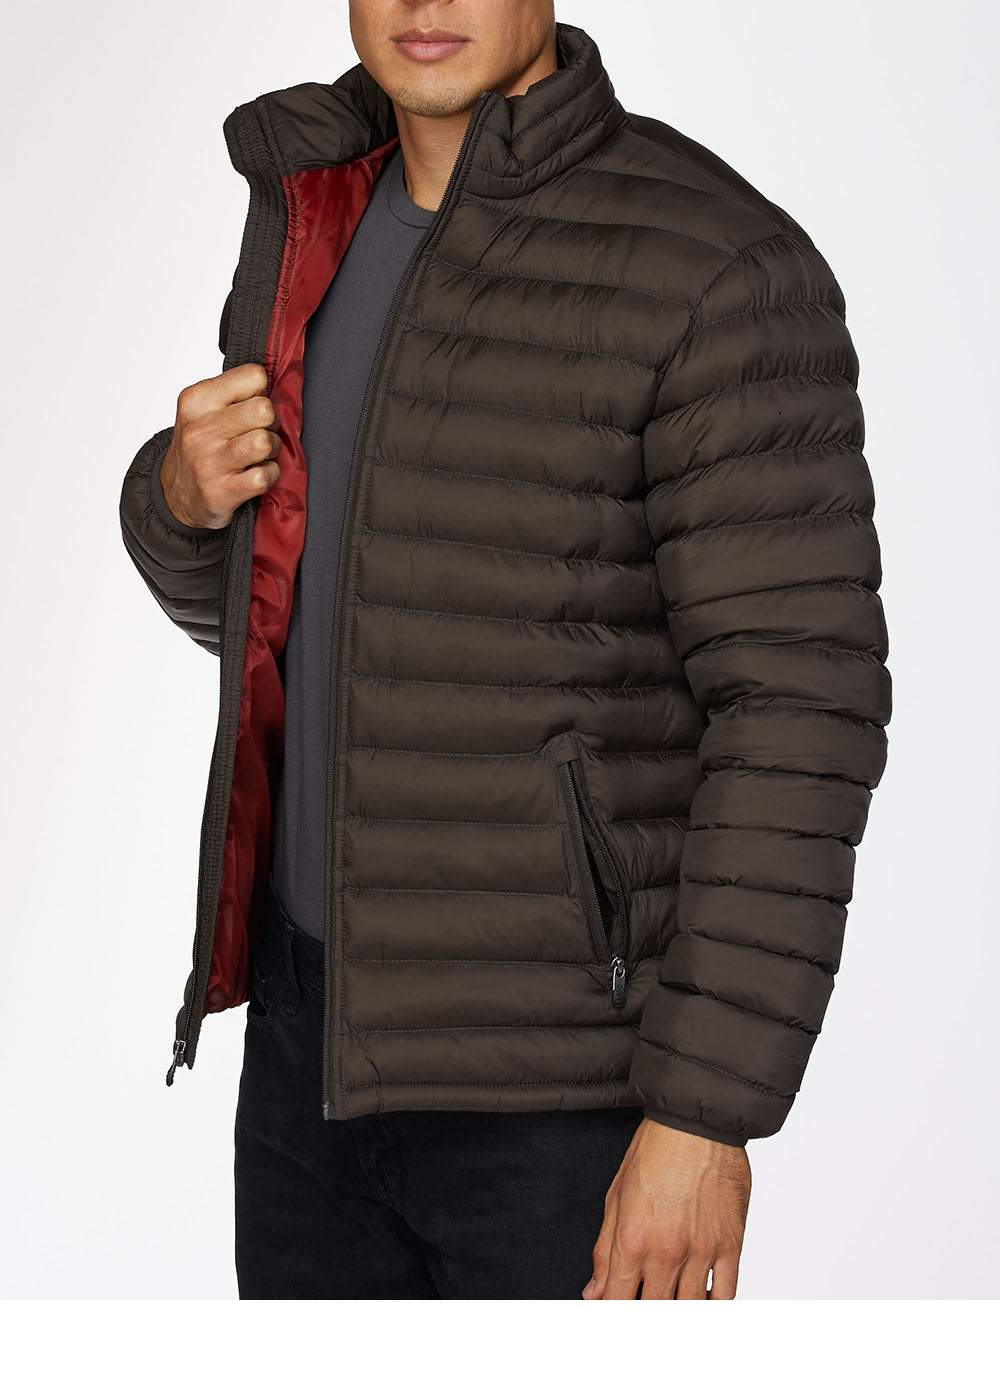 Men's Nylon Quilted Puffer Jacket -NJ640-Brown